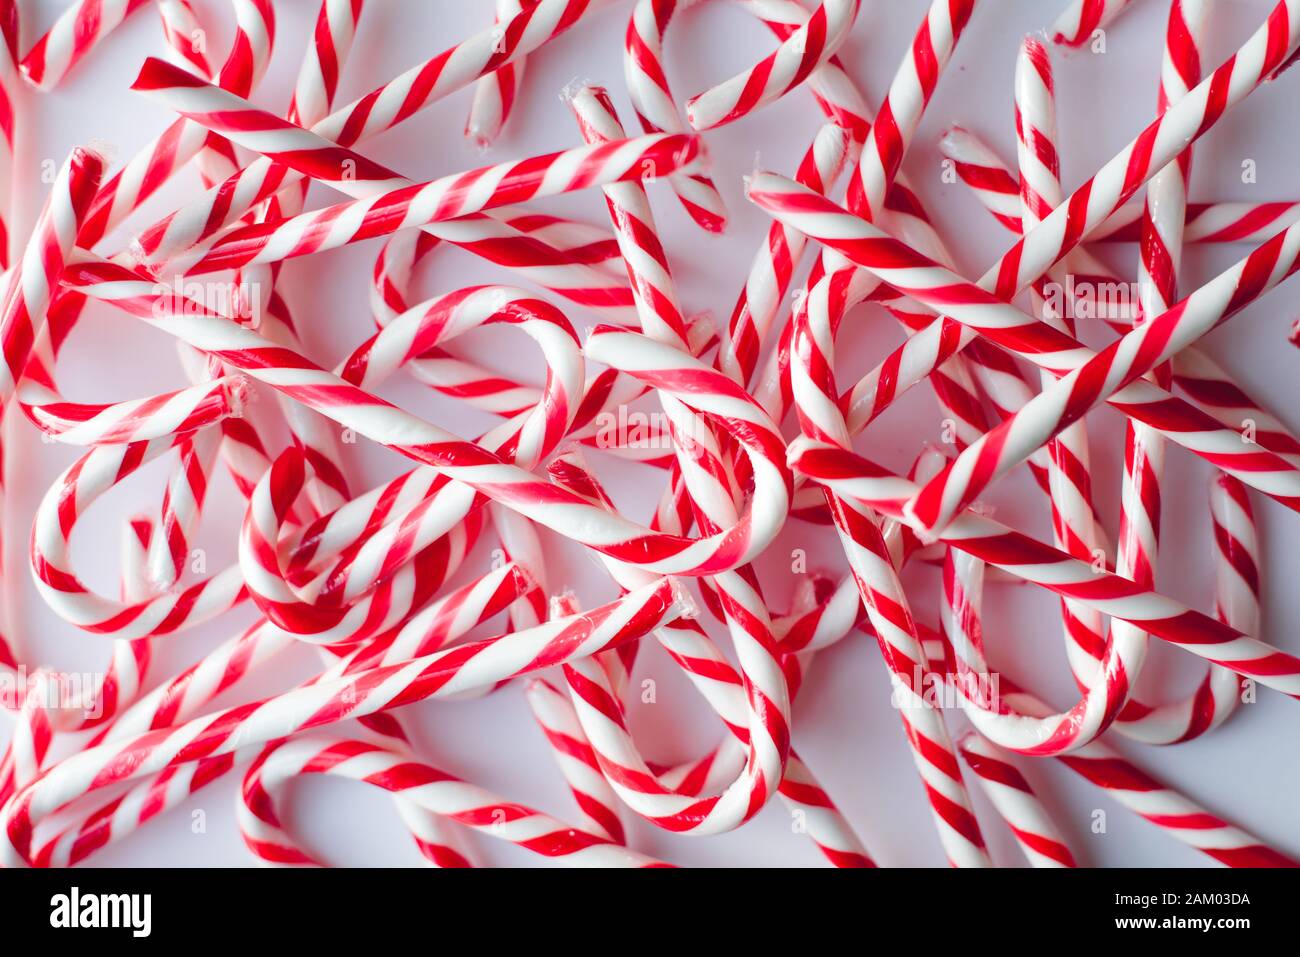 Close up of many candy canes against a plain white background. Stock Photo